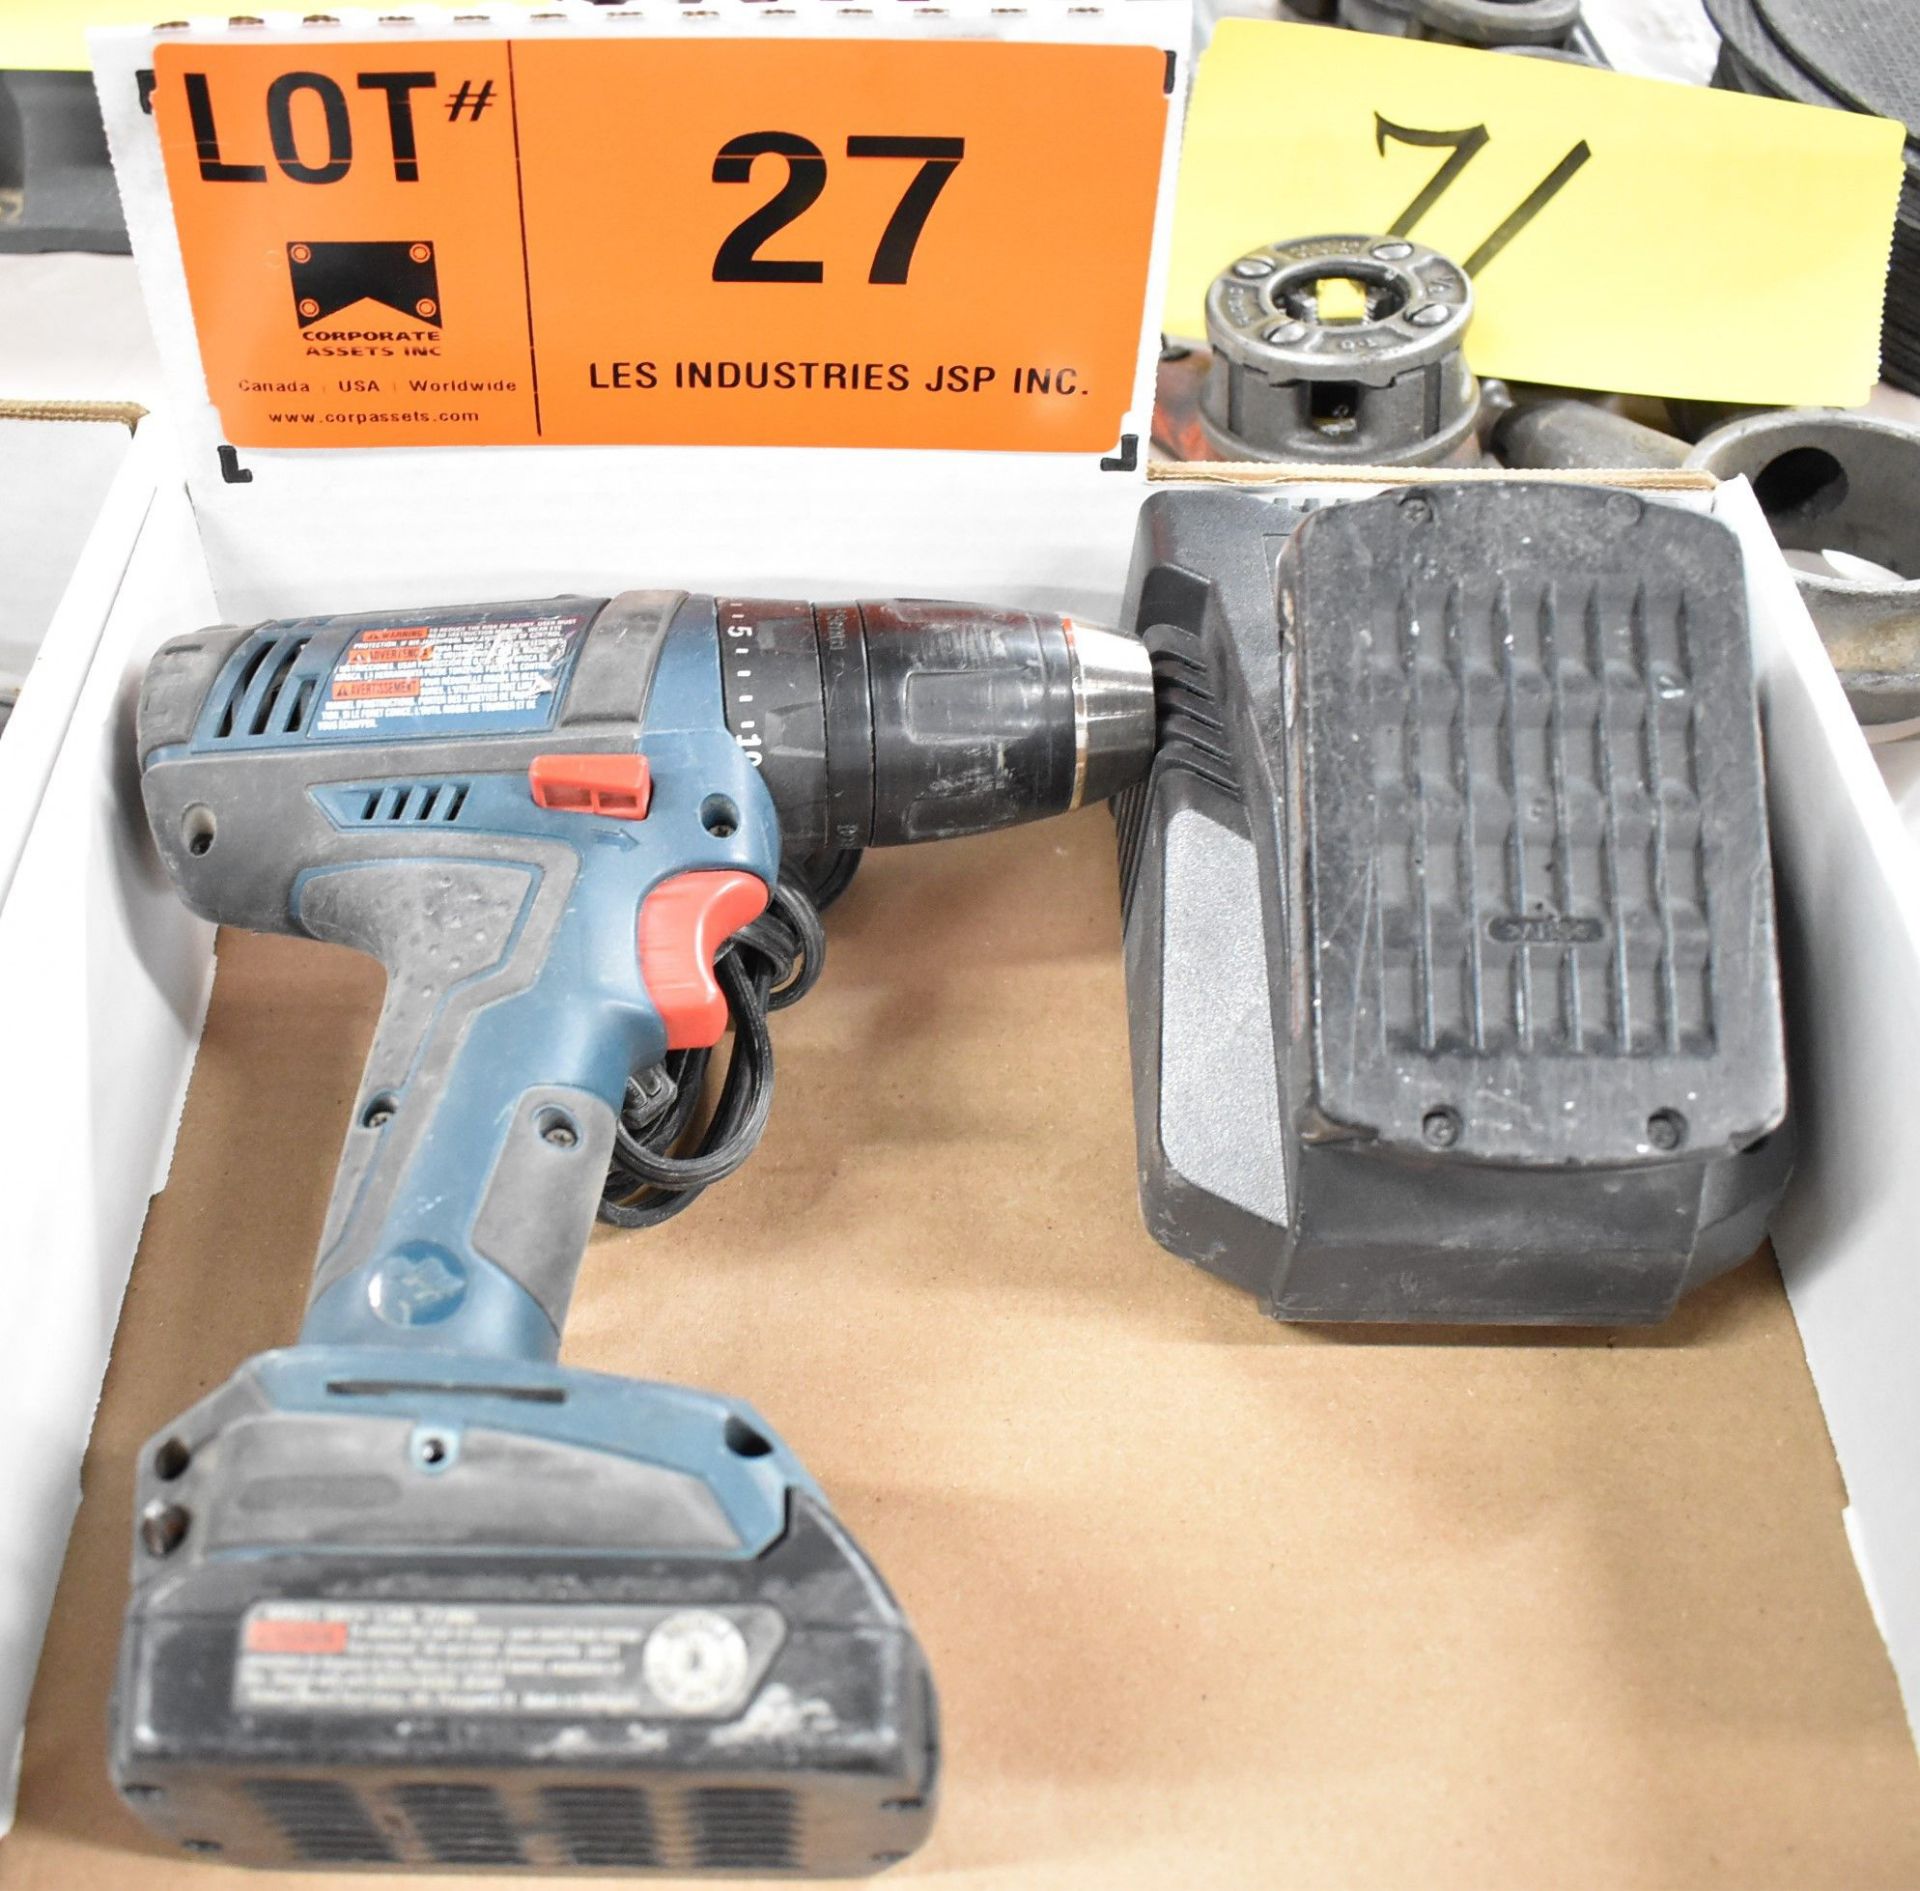 LOT/ BOSCH CORDLESS DRILL WITH CHARGER AND BATTERY